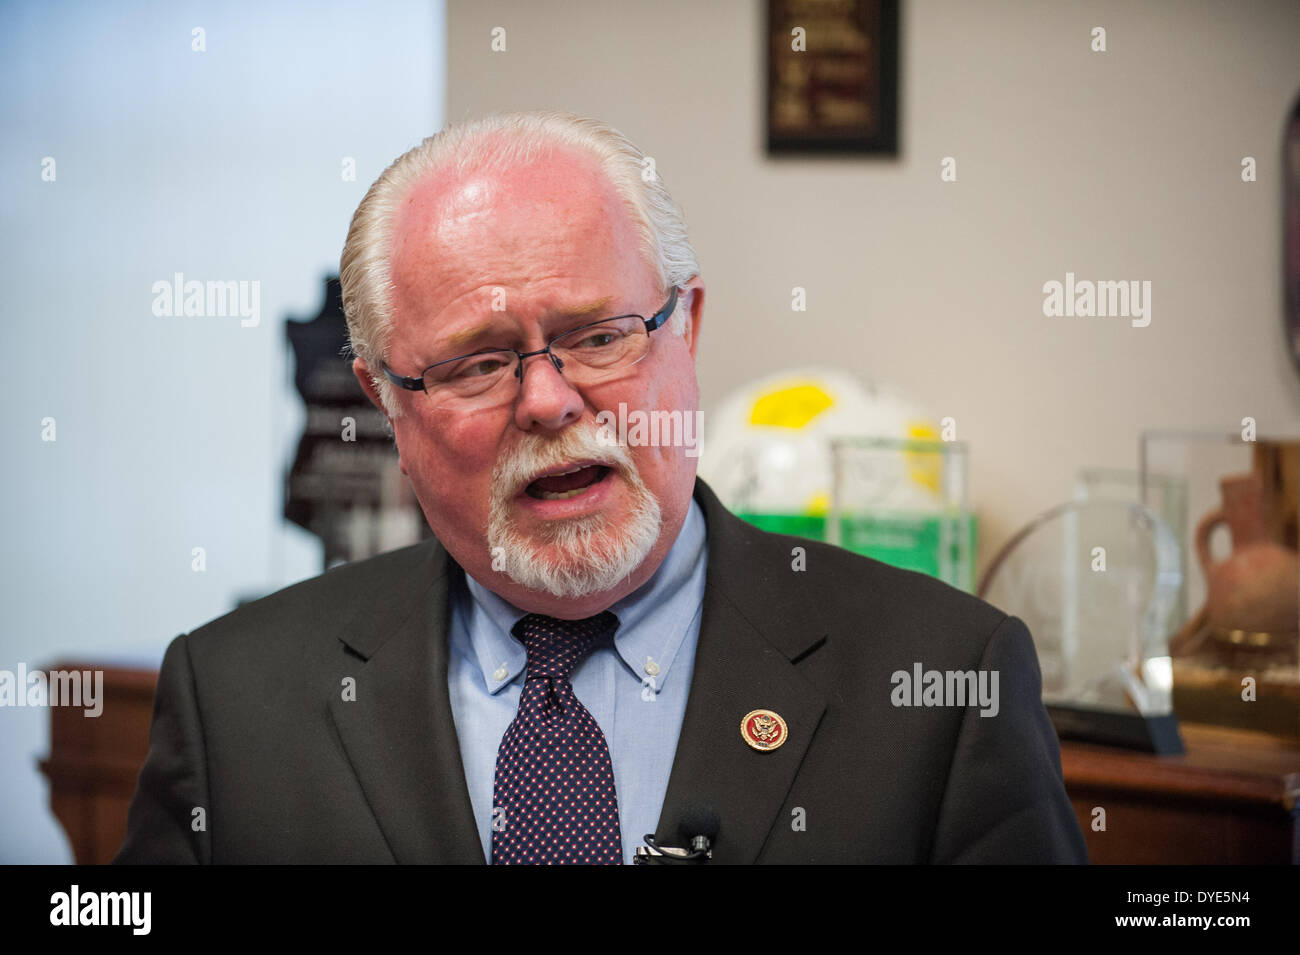 Tucson, Arizona, USA. 15th Apr, 2014. Rep. RON BARBER (D-Ariz.) today held a meeting with U.S. Air Force Gen. G. Hostage over the future of the A-10 and its home base Davis-Monthan Air Force Base in Tucson, Ariz. Barber said during a press conference following the closed meeting that Hostage called DMAFB vital, and said he would work to keep the base open even after the A-10 is retired. Barber is also working with other members to keep the A-10 and F-16 fighters flying even as the Pentagon moves closer to deploying the F-35. © Will Seberger/ZUMAPRESS.com/Alamy Live News Stock Photo